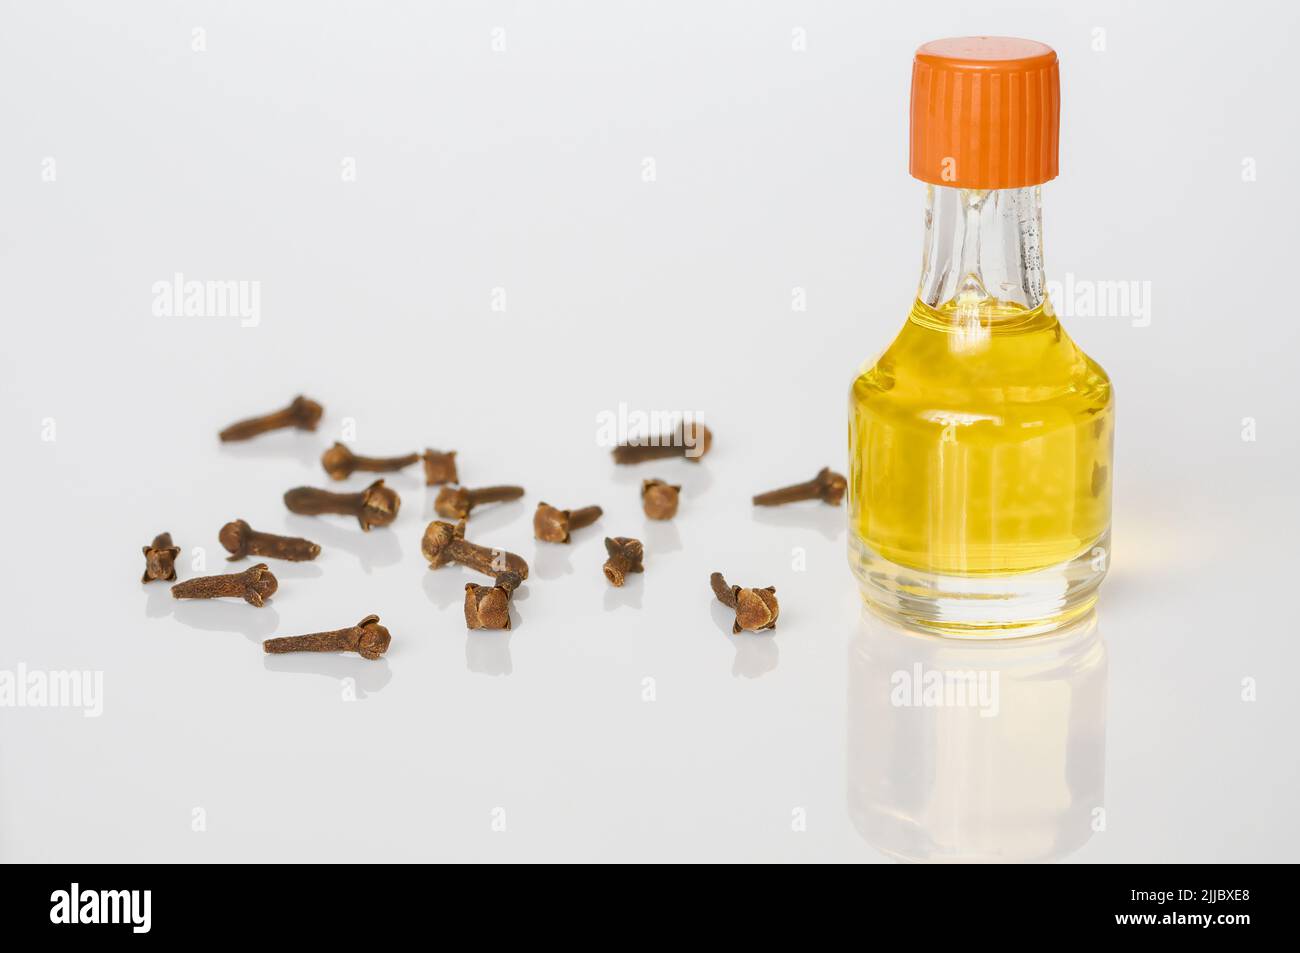 Clove oil and cloves on white background, essential oil in bottle, zen background concept, spa Stock Photo